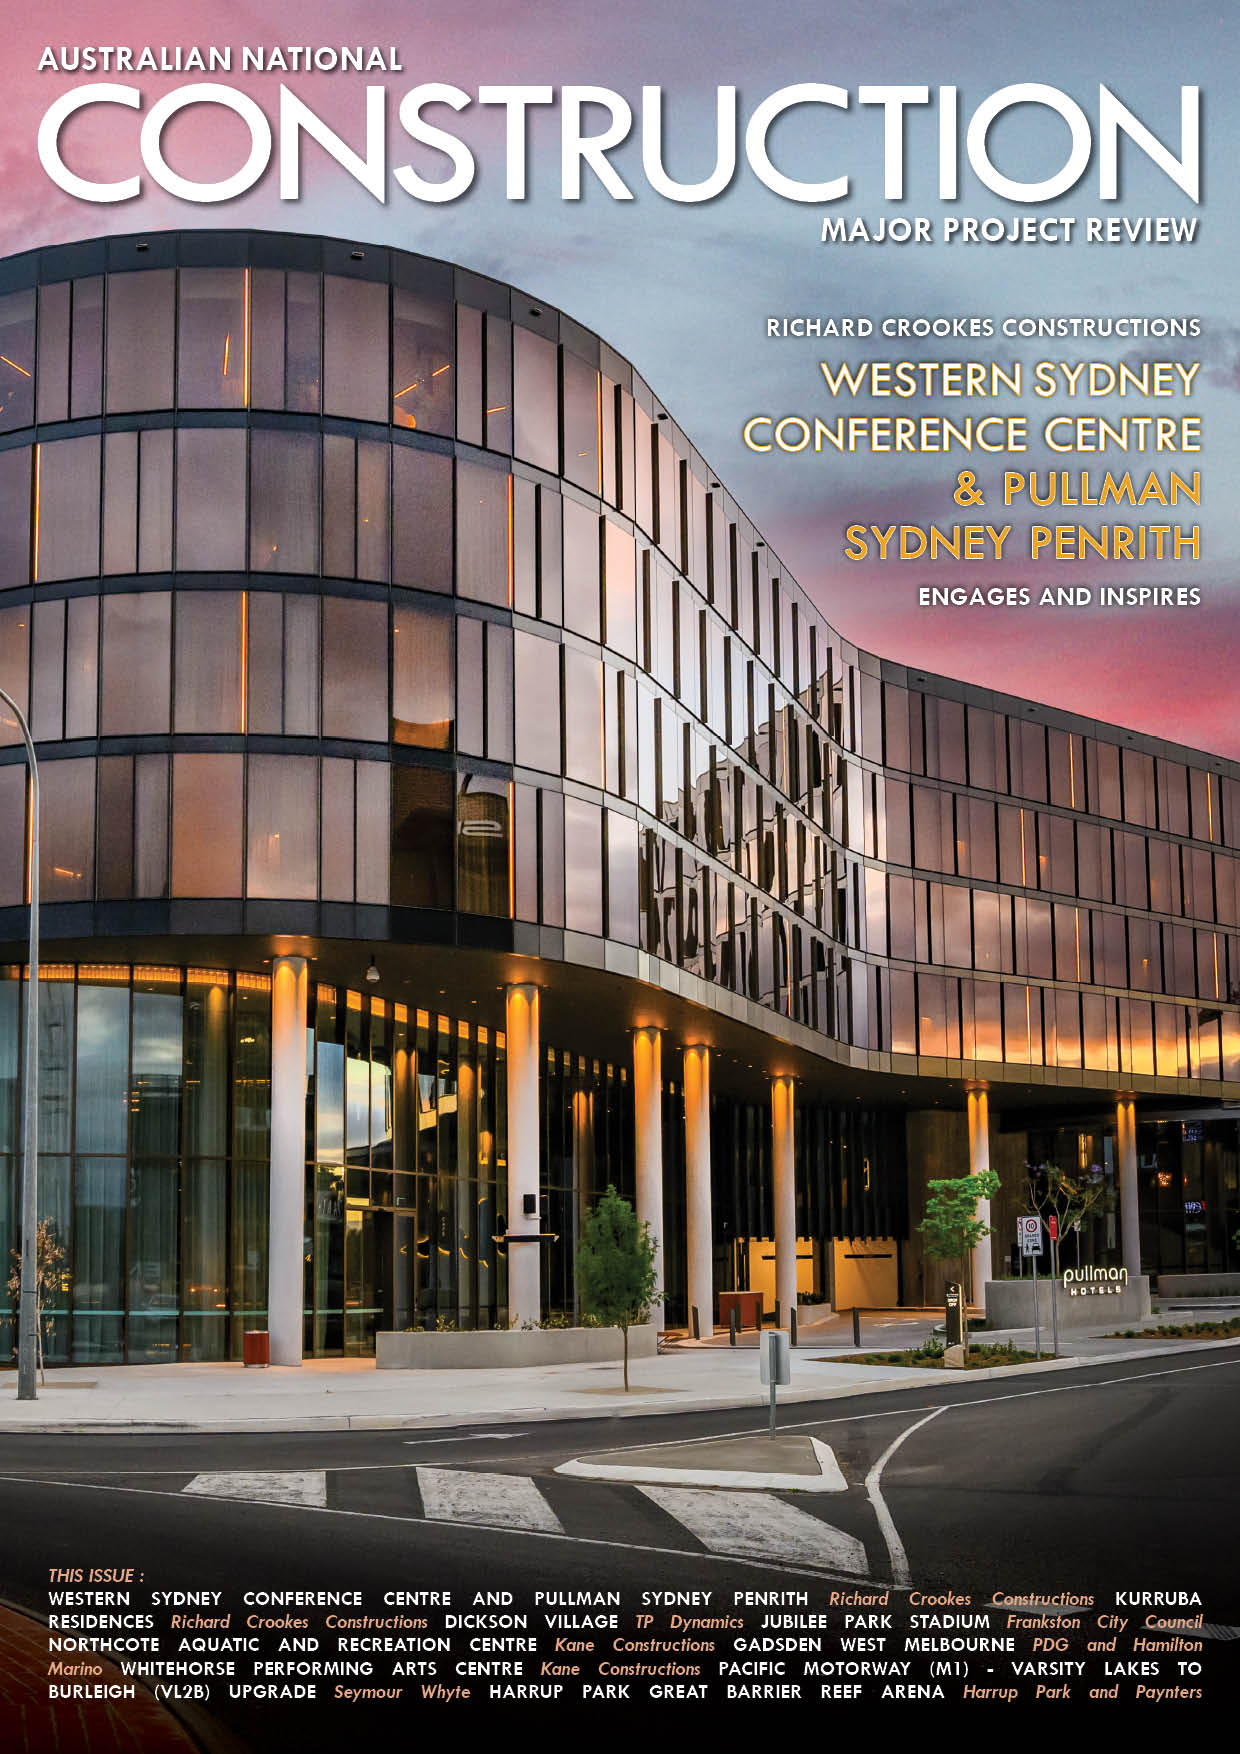 ANCR Digital Issue cover - featuring Western Sydney Conference Centre and Pullman Sydney Penrith project.